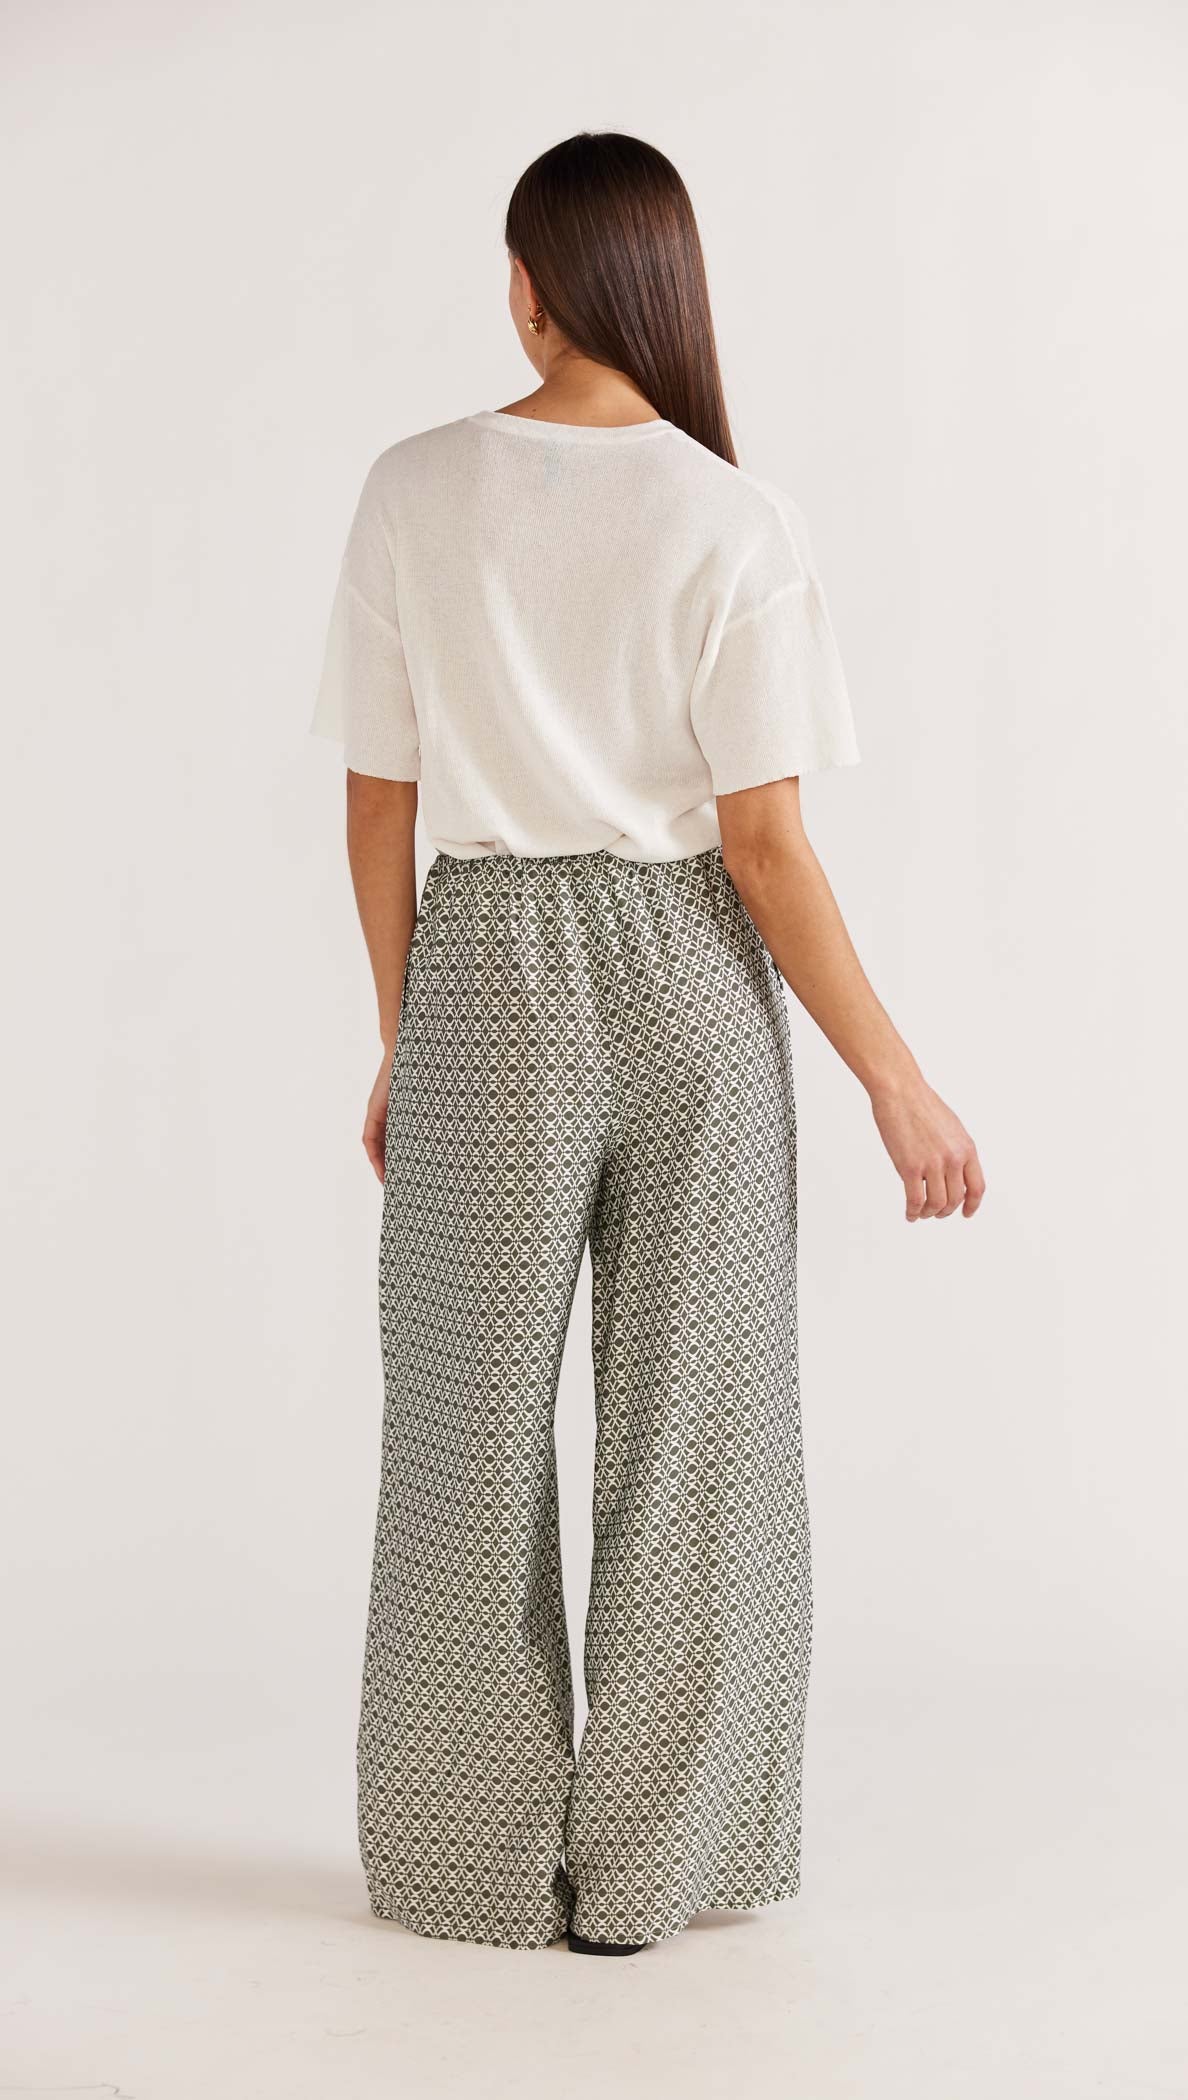 STAPLE THE LABEL Cyprus Relaxed Pants - Sage